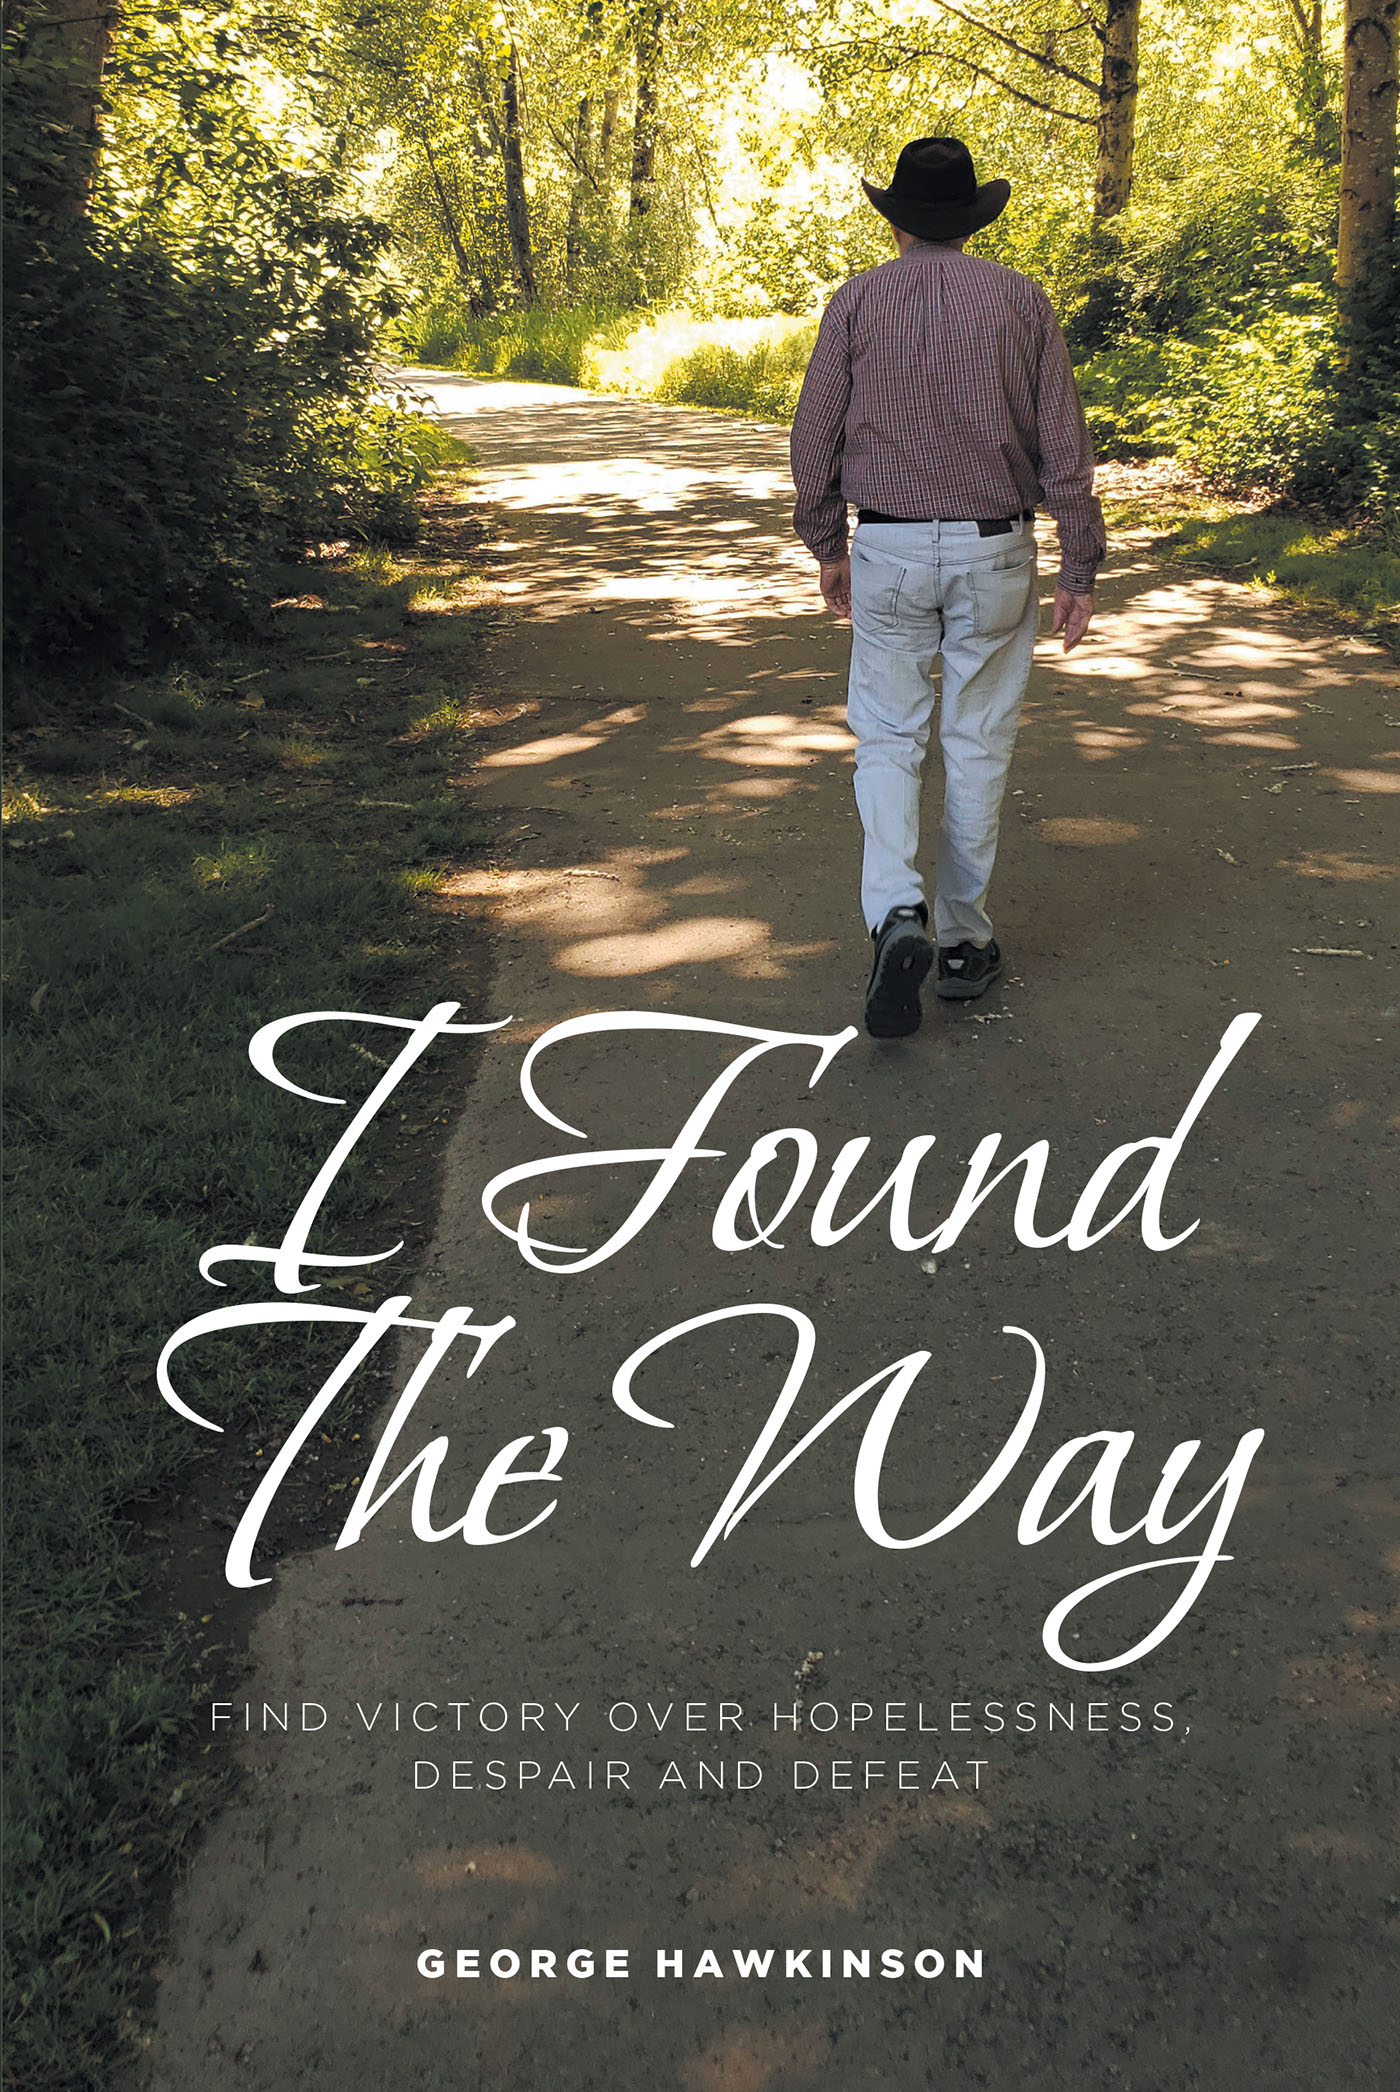 Author George Hawkinson’s New Book, “I Found The Way: Find Victory Over Hopelessness, Despair, and Defeat,” Guides Readers in Deepening Their Ever-Growing Faith